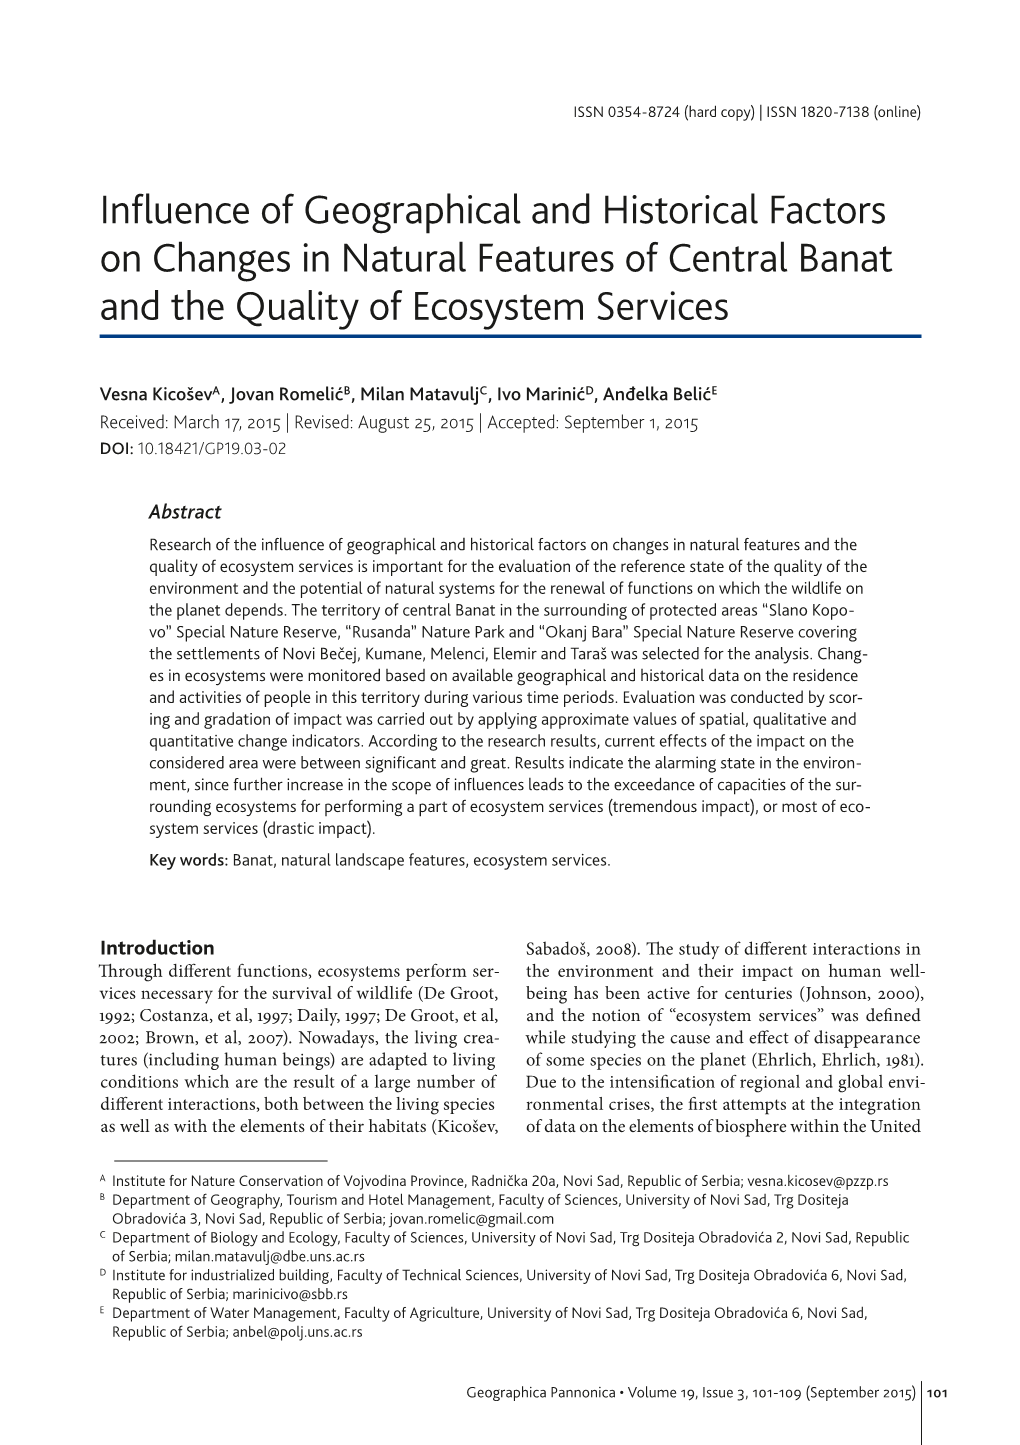 Influence of Geographical and Historical Factors on Changes in Natural Features of Central Banat and the Quality of Ecosystem Services